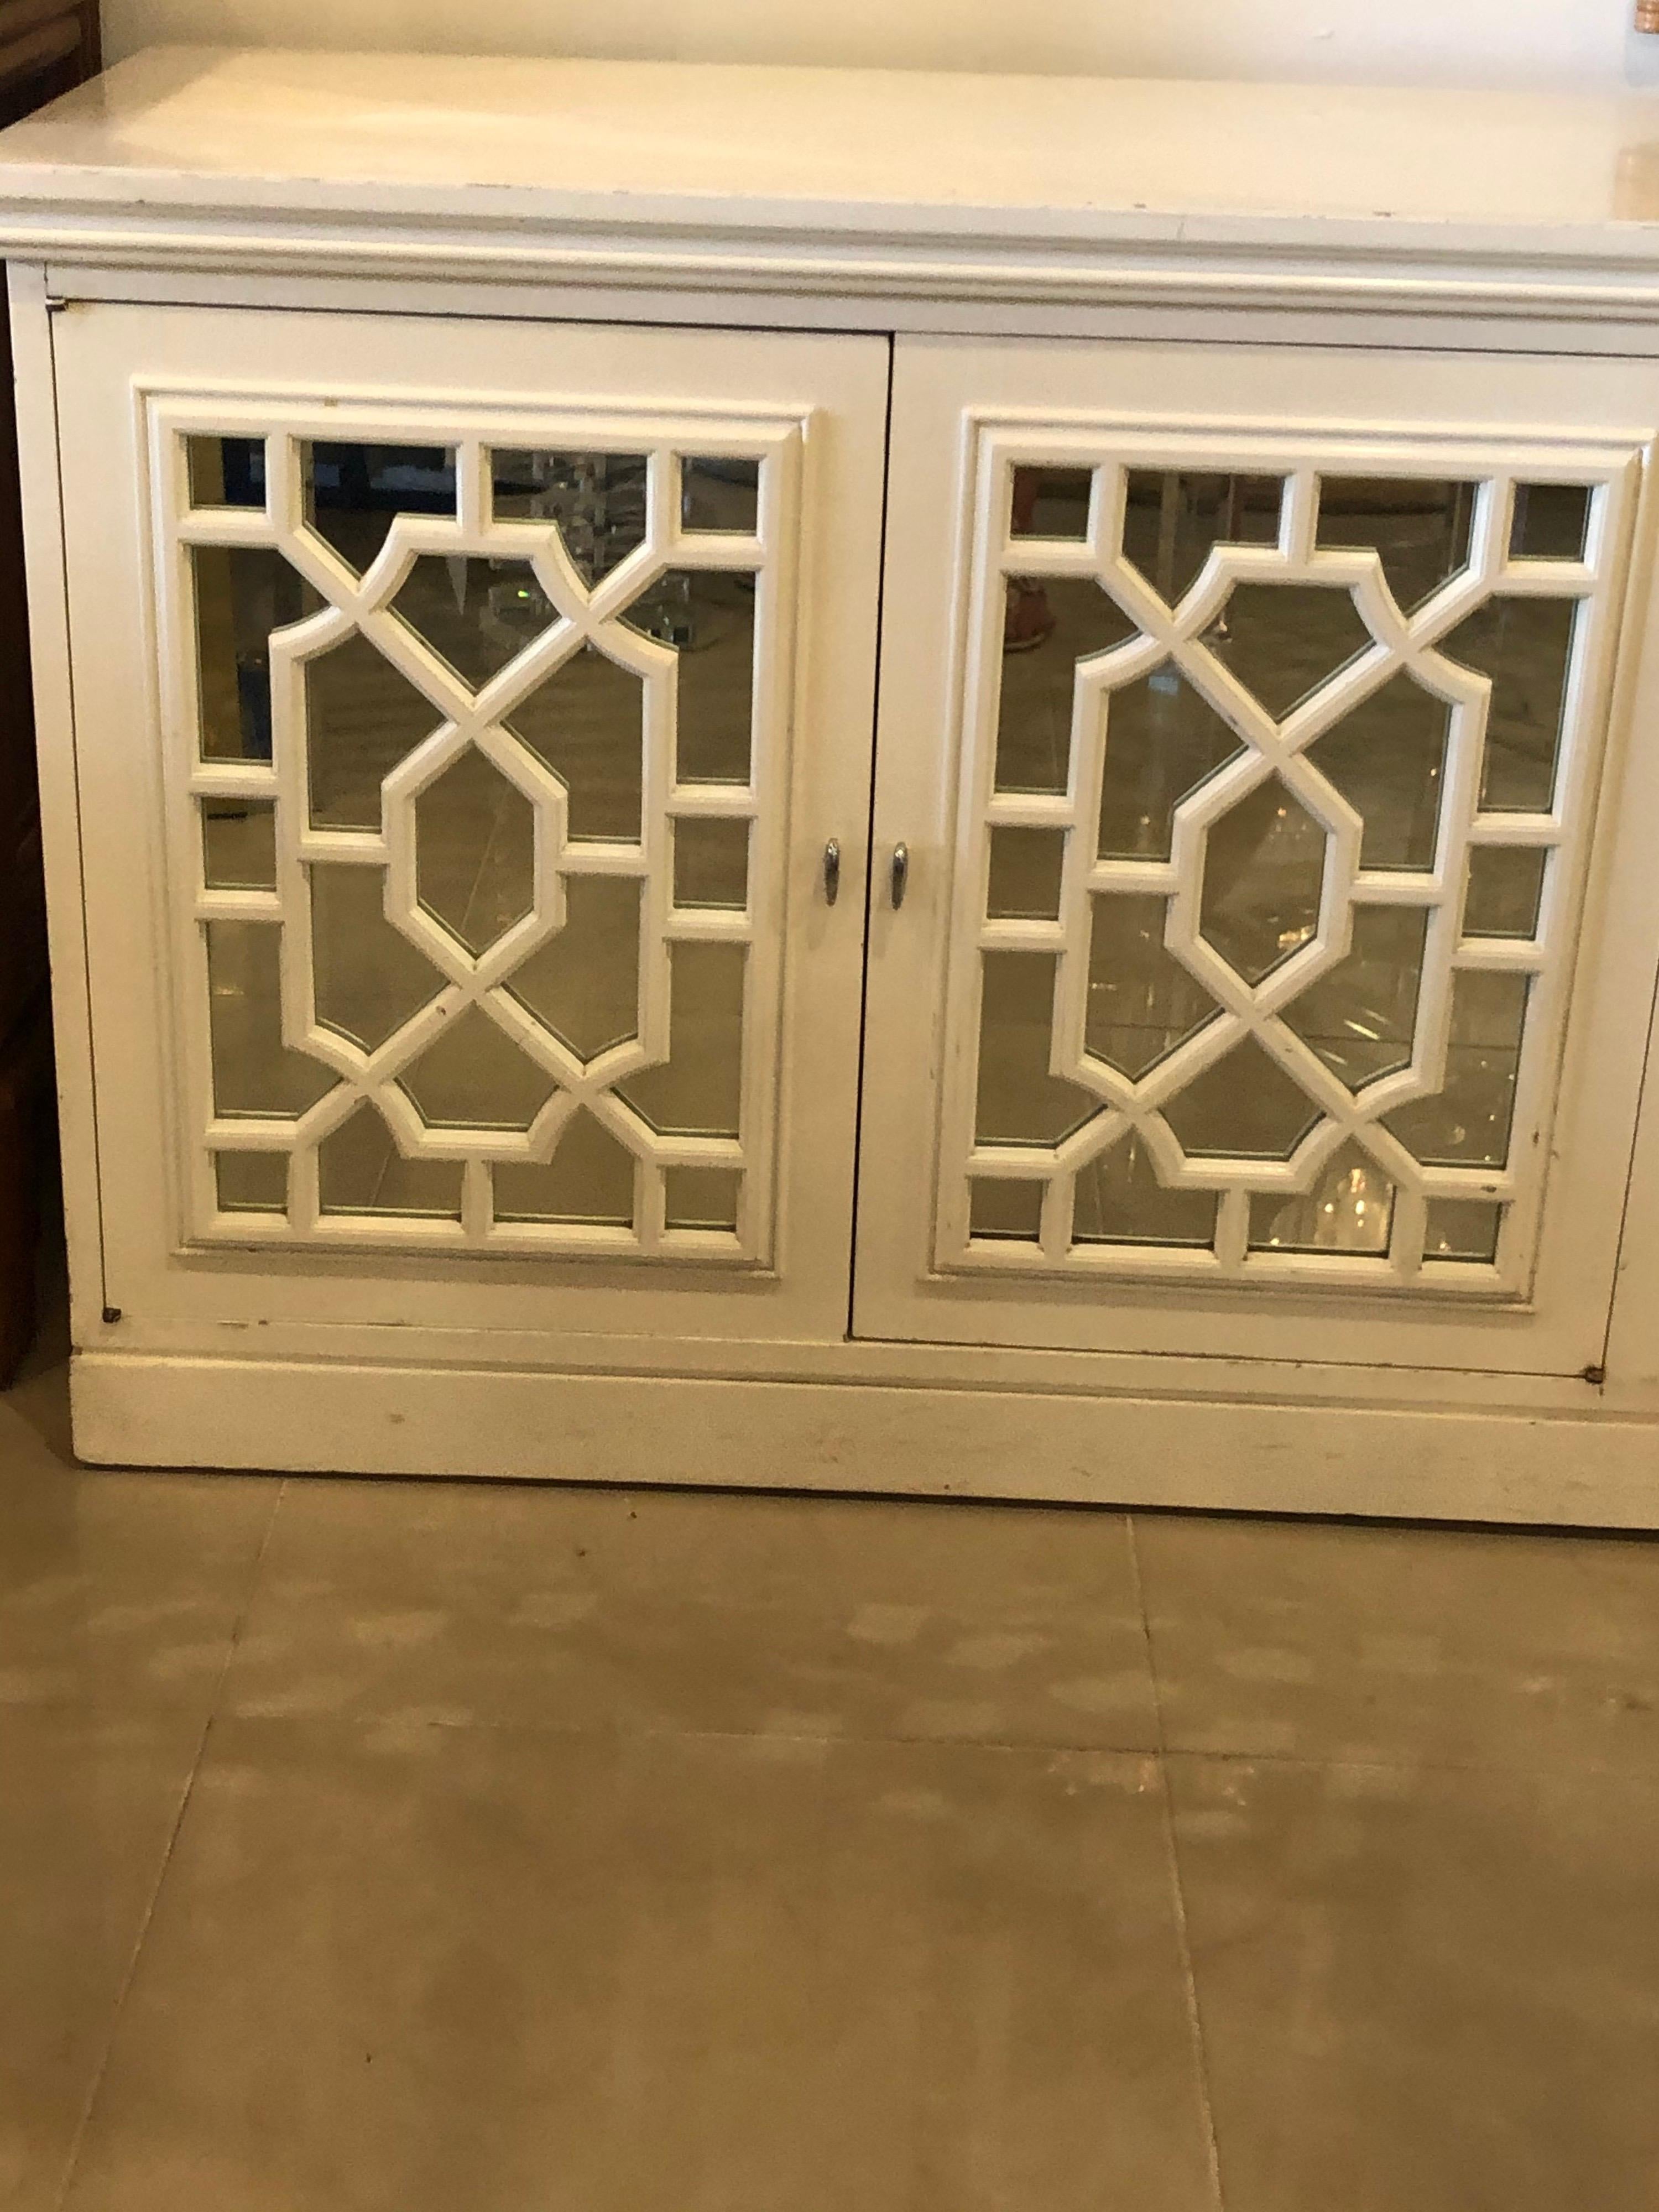 Hollywood Regency Vintage Fretwork Fret Chinese Chippendale Mirrored Cabinet Credenza Sideboard